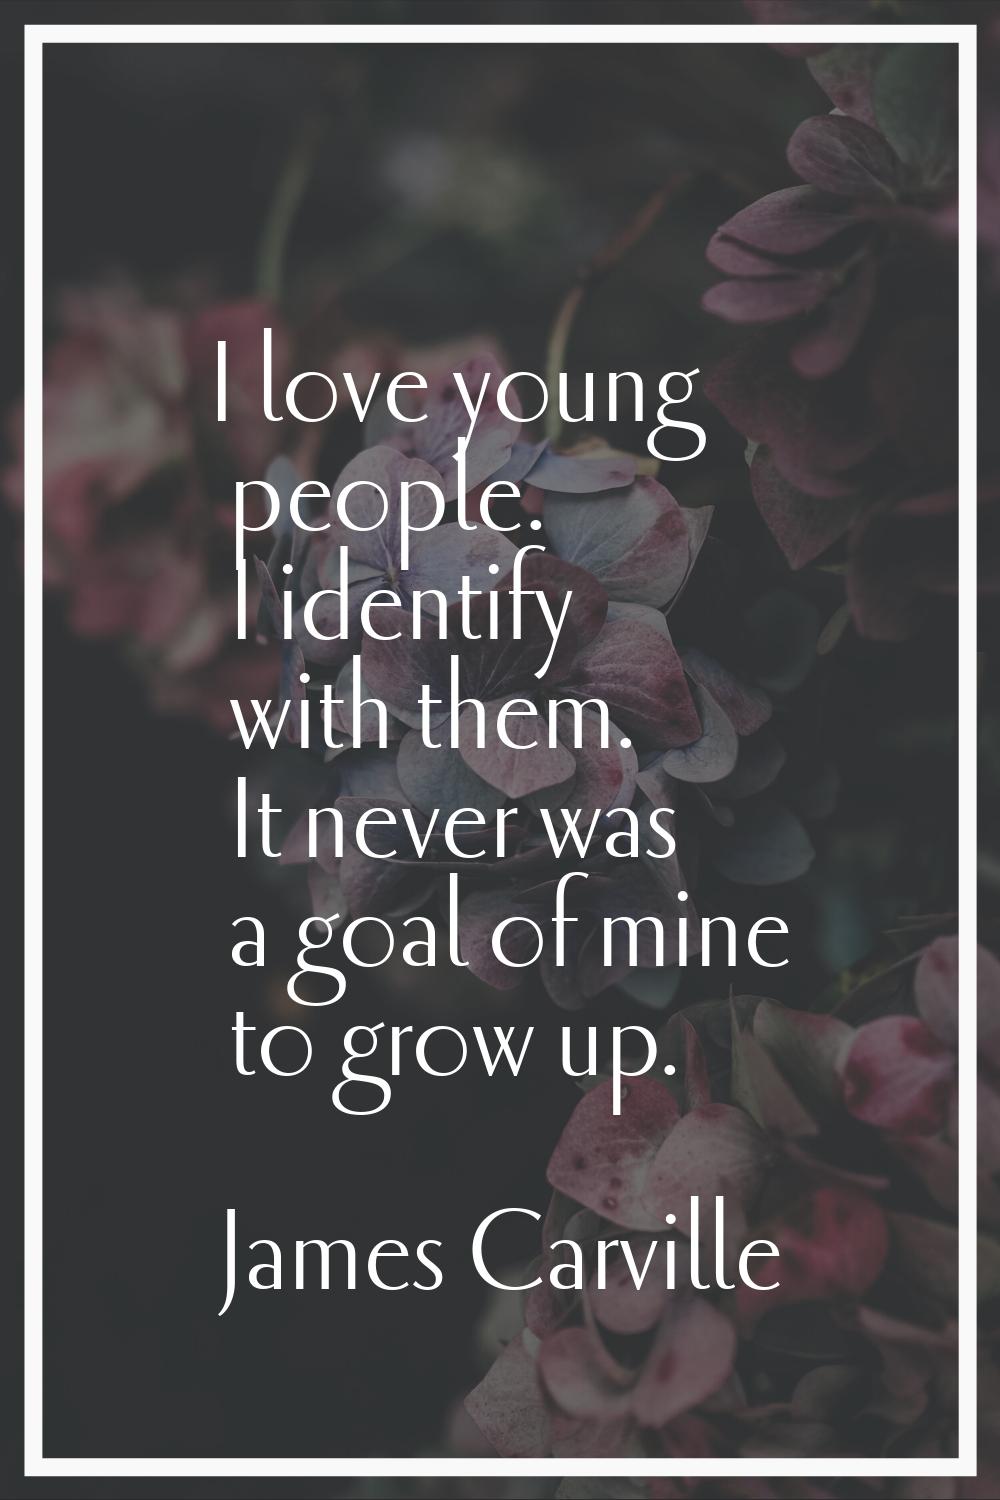 I love young people. I identify with them. It never was a goal of mine to grow up.